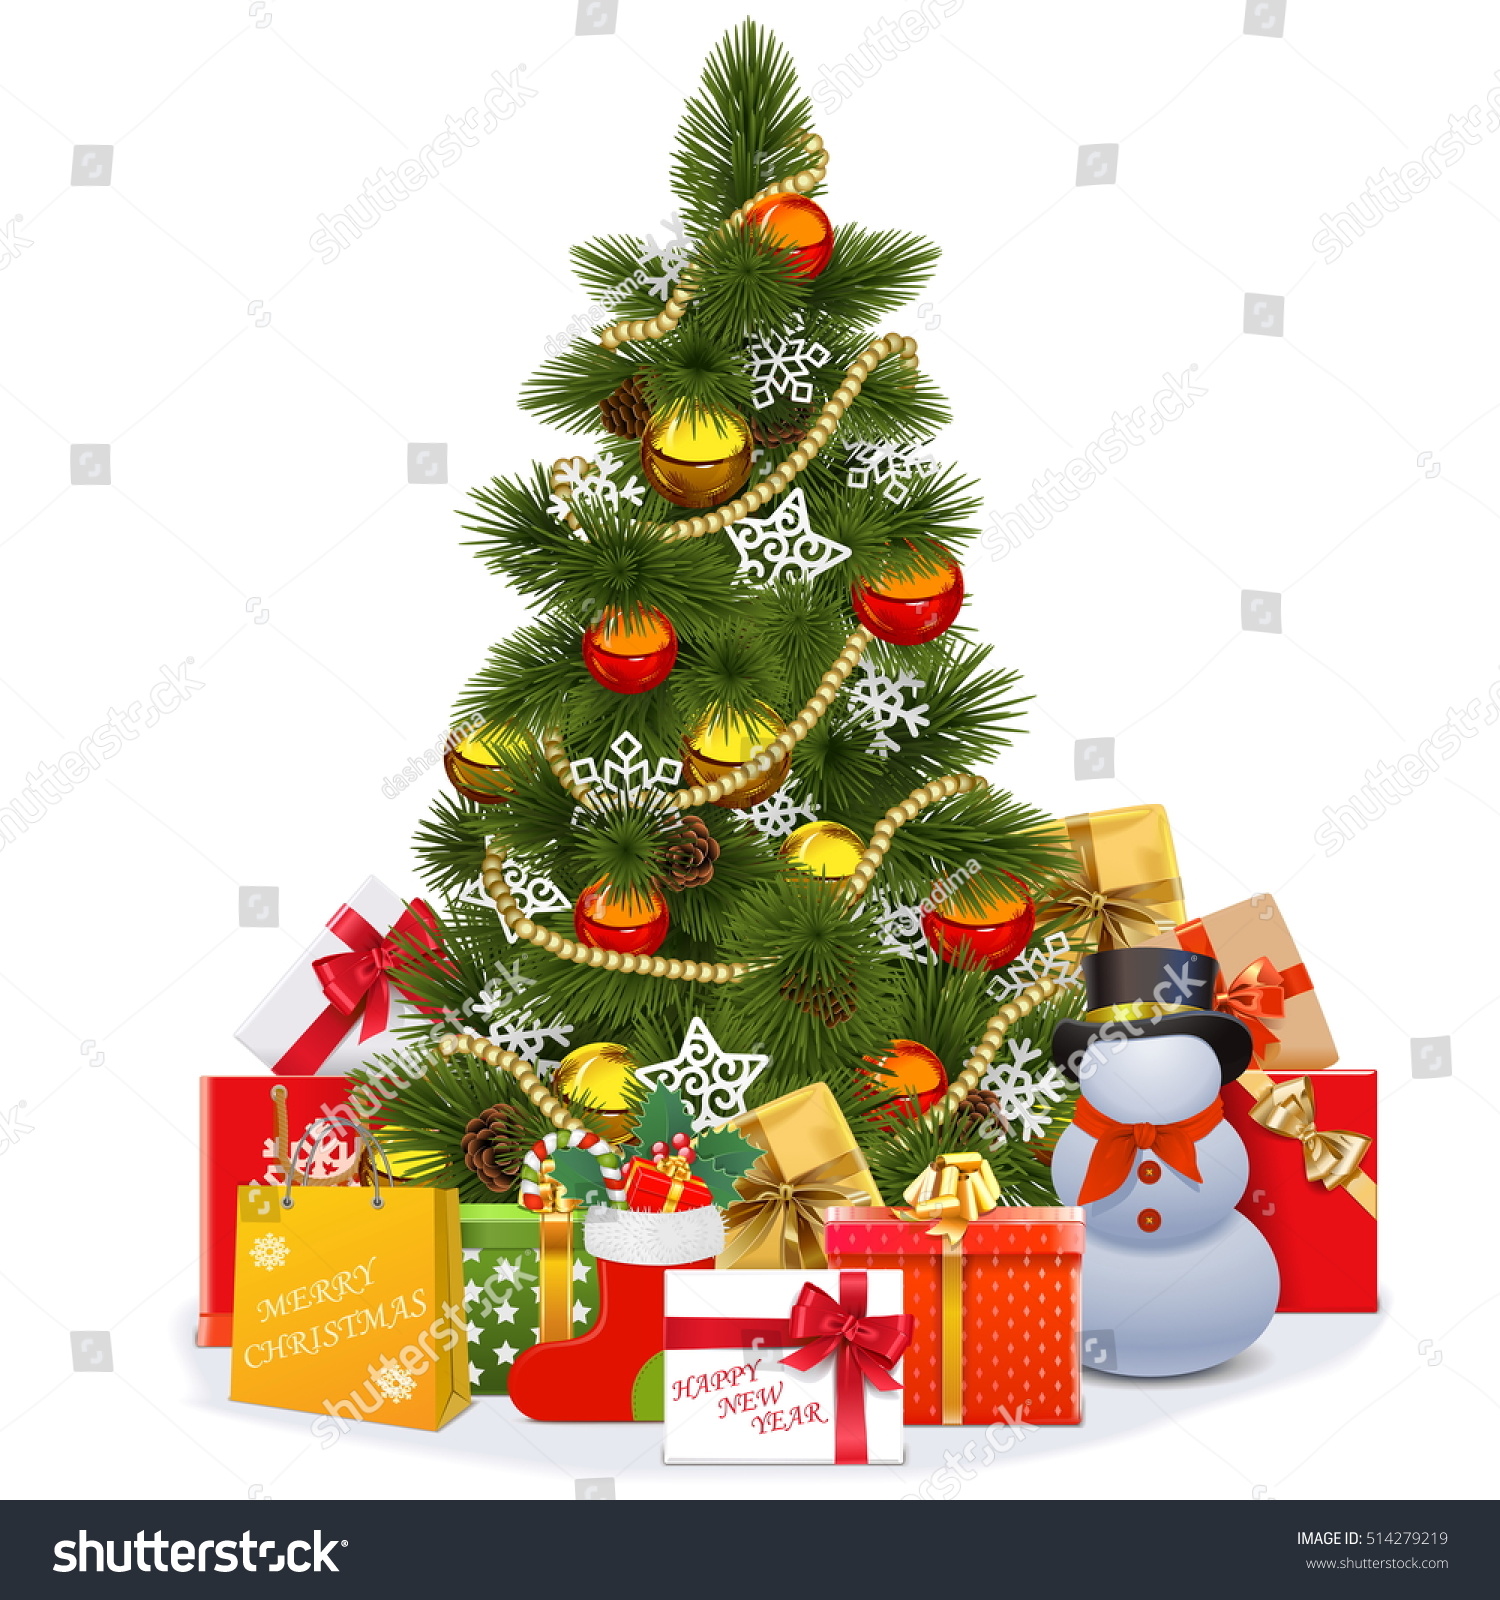 Vector Christmas Tree With Snowman - 514279219 : Shutterstock